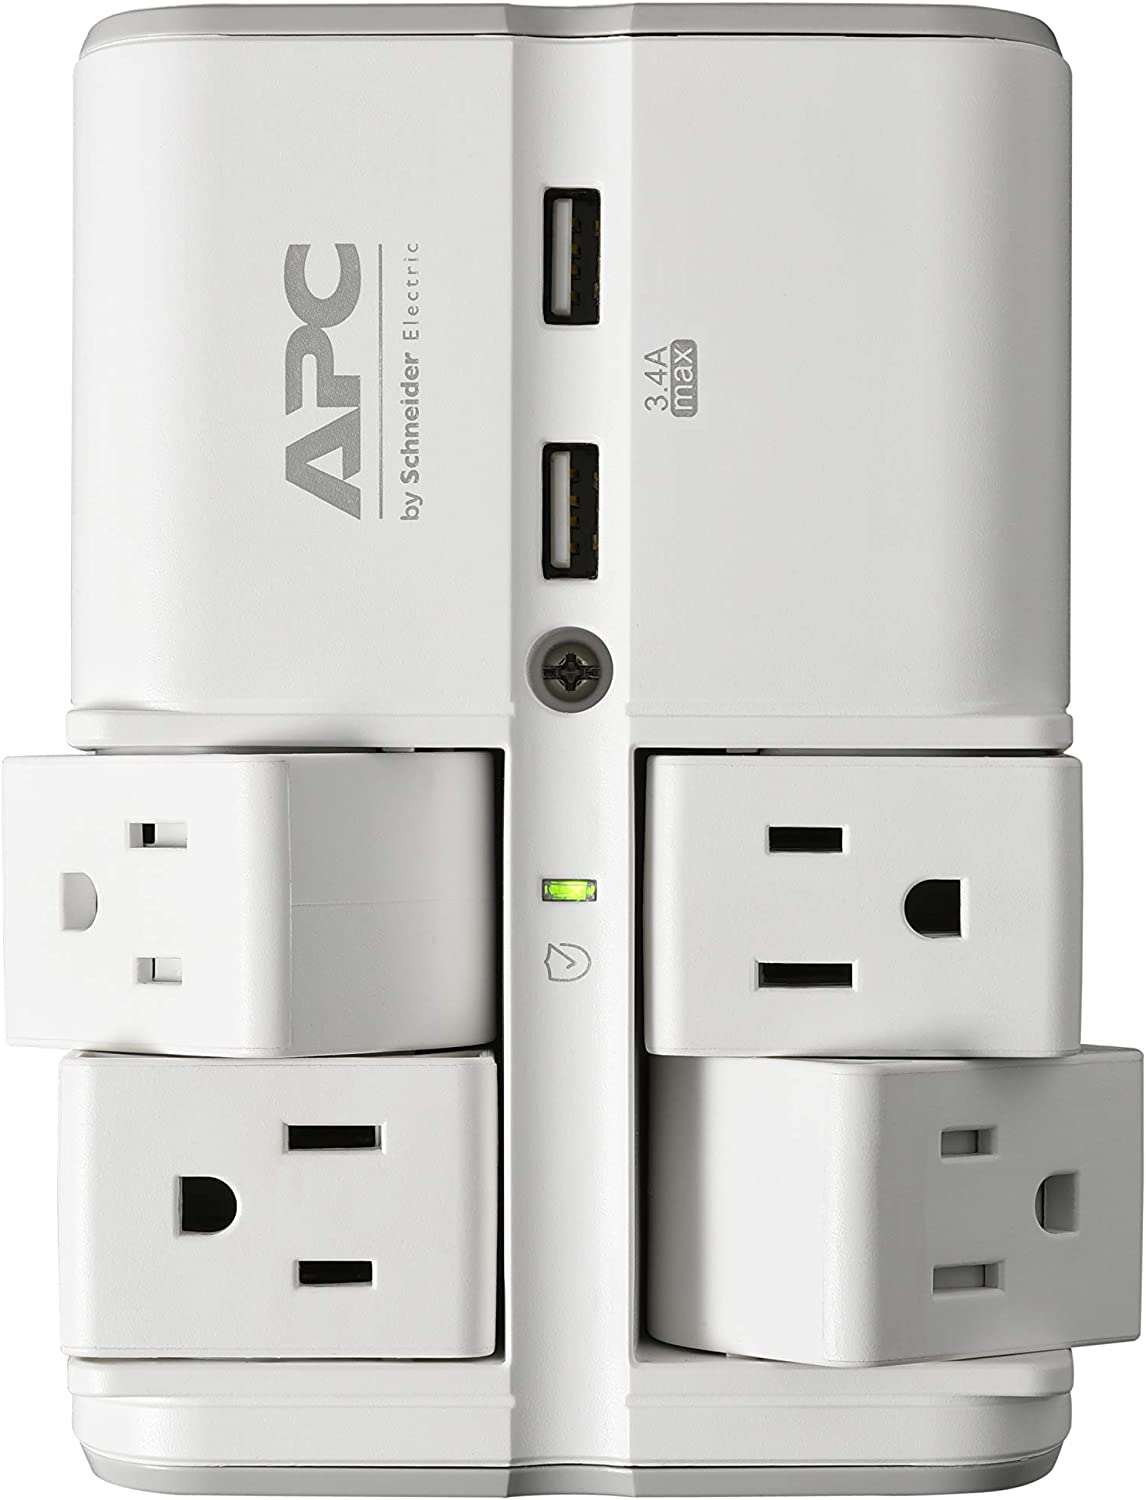 APC Wall Outlet Surge Protector with USB Ports, PE4WRU3, (4) Rotating Multi Plug Outlet, 1080 Joule Surge Protection 4 Rotating Outlets